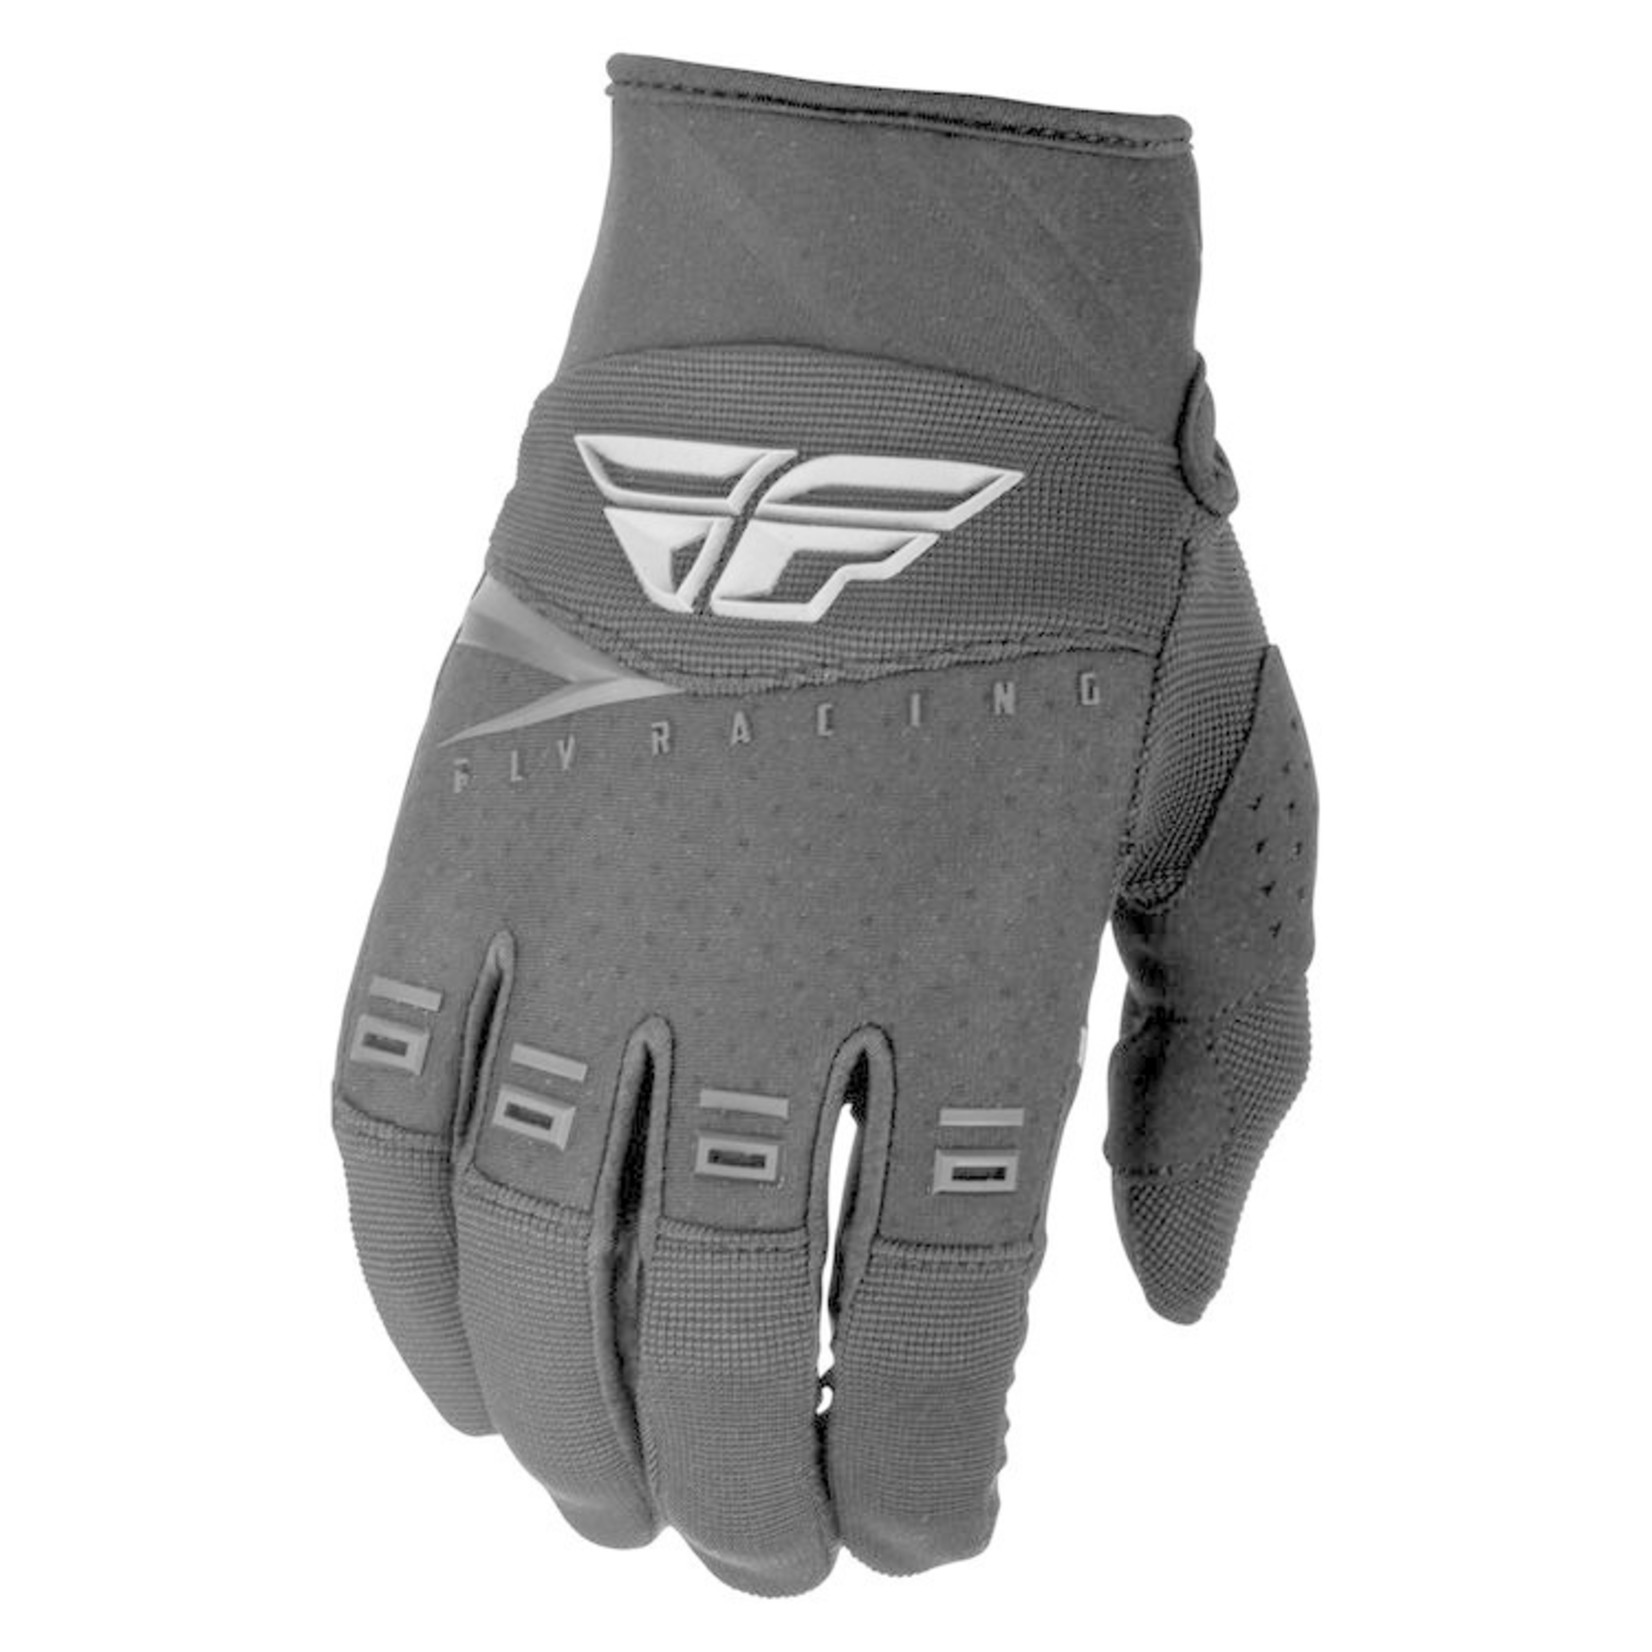 FLY RACING FLY F-16 BIKE GLOVES